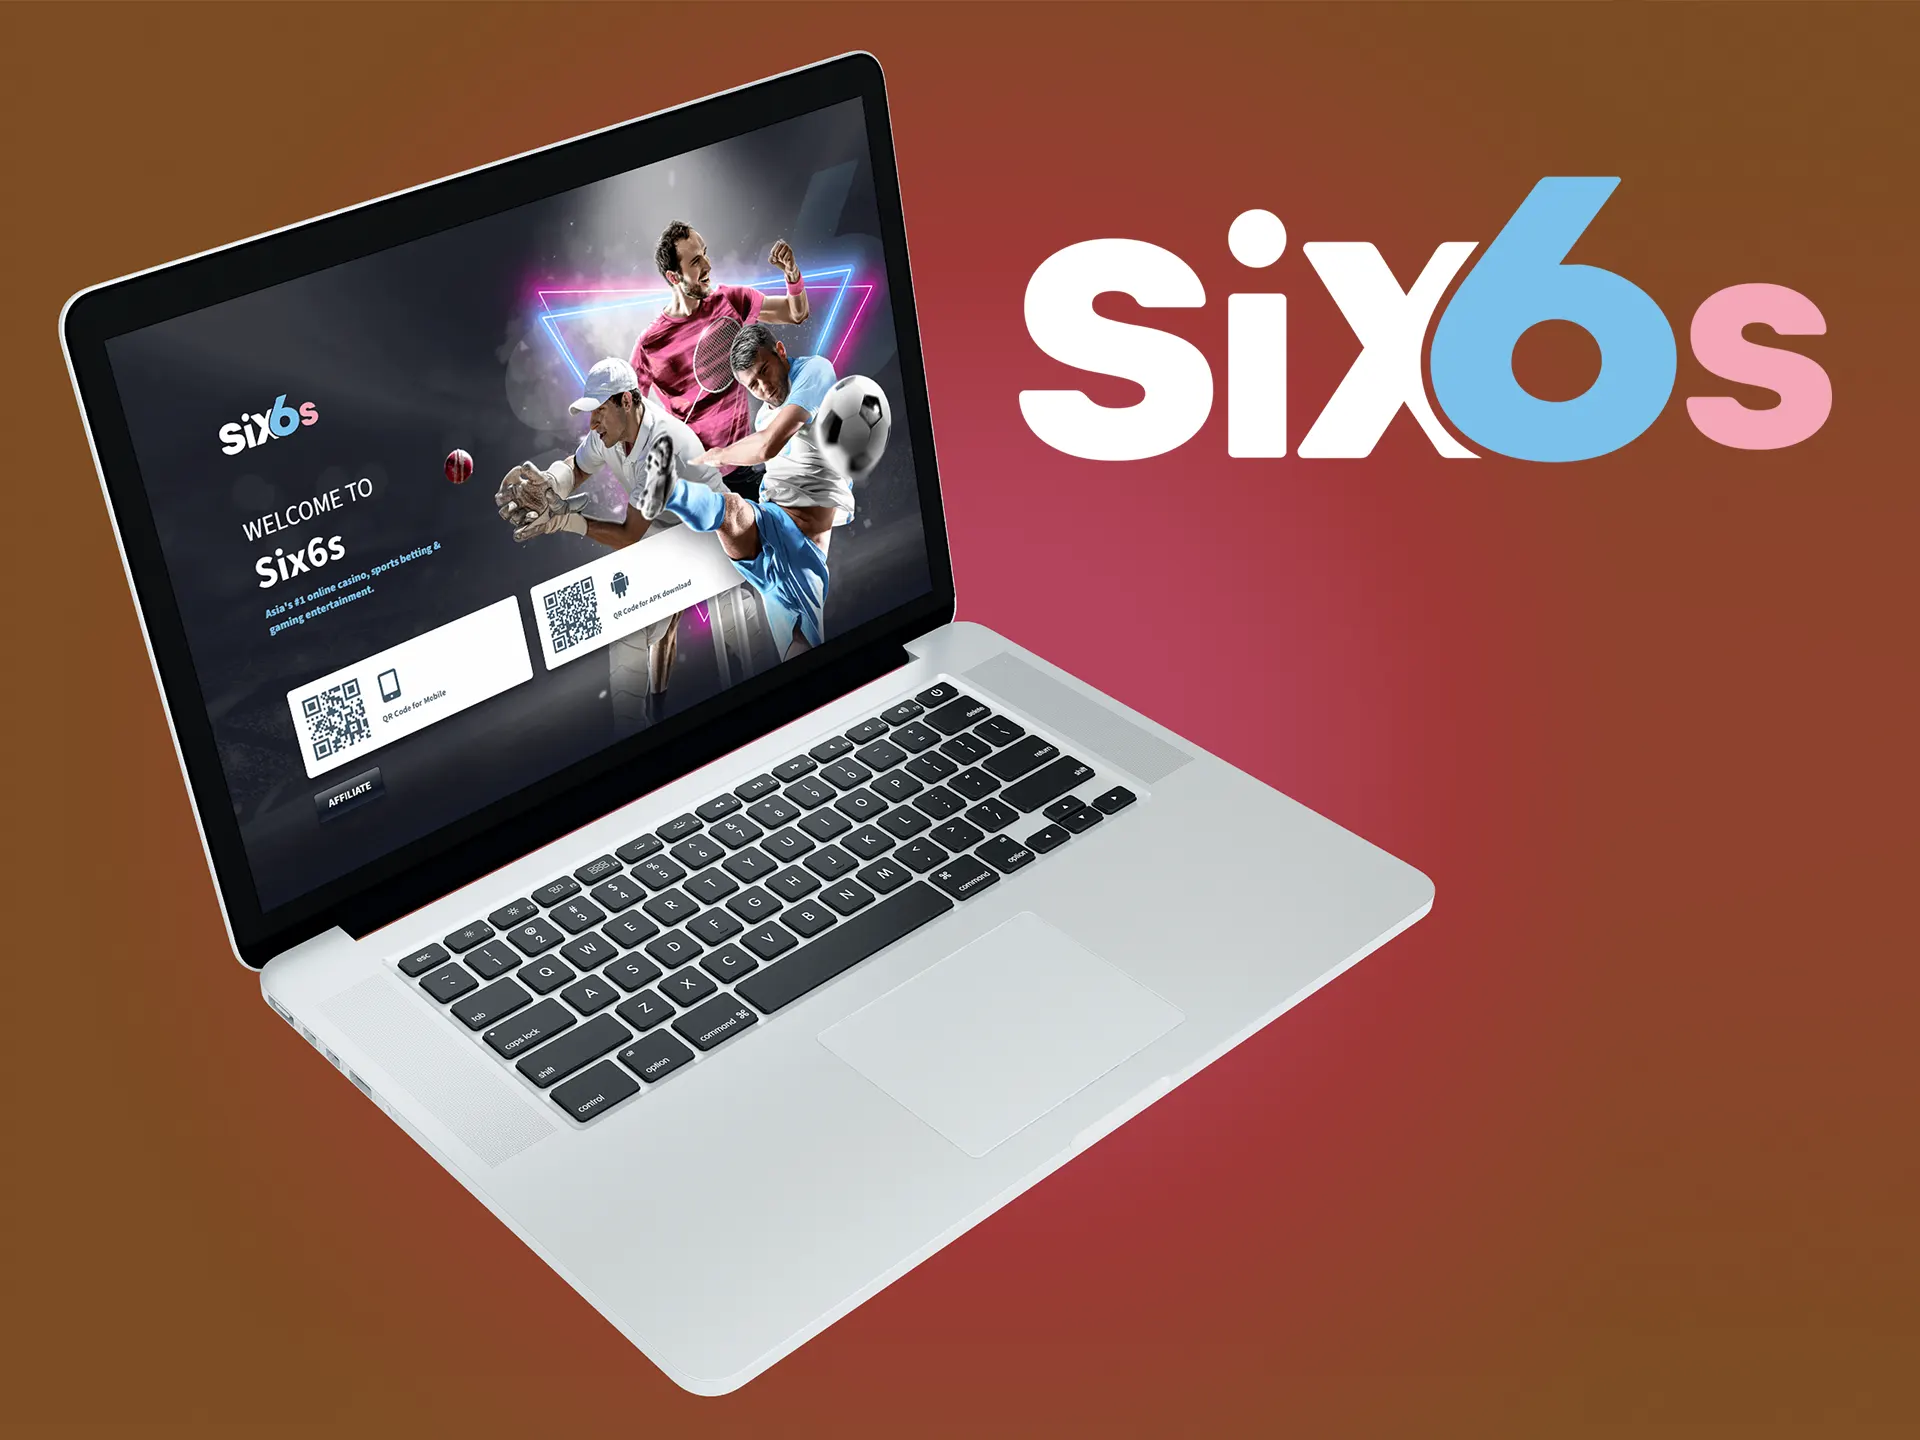 Six6s is a great place for making bets and playing casino games.